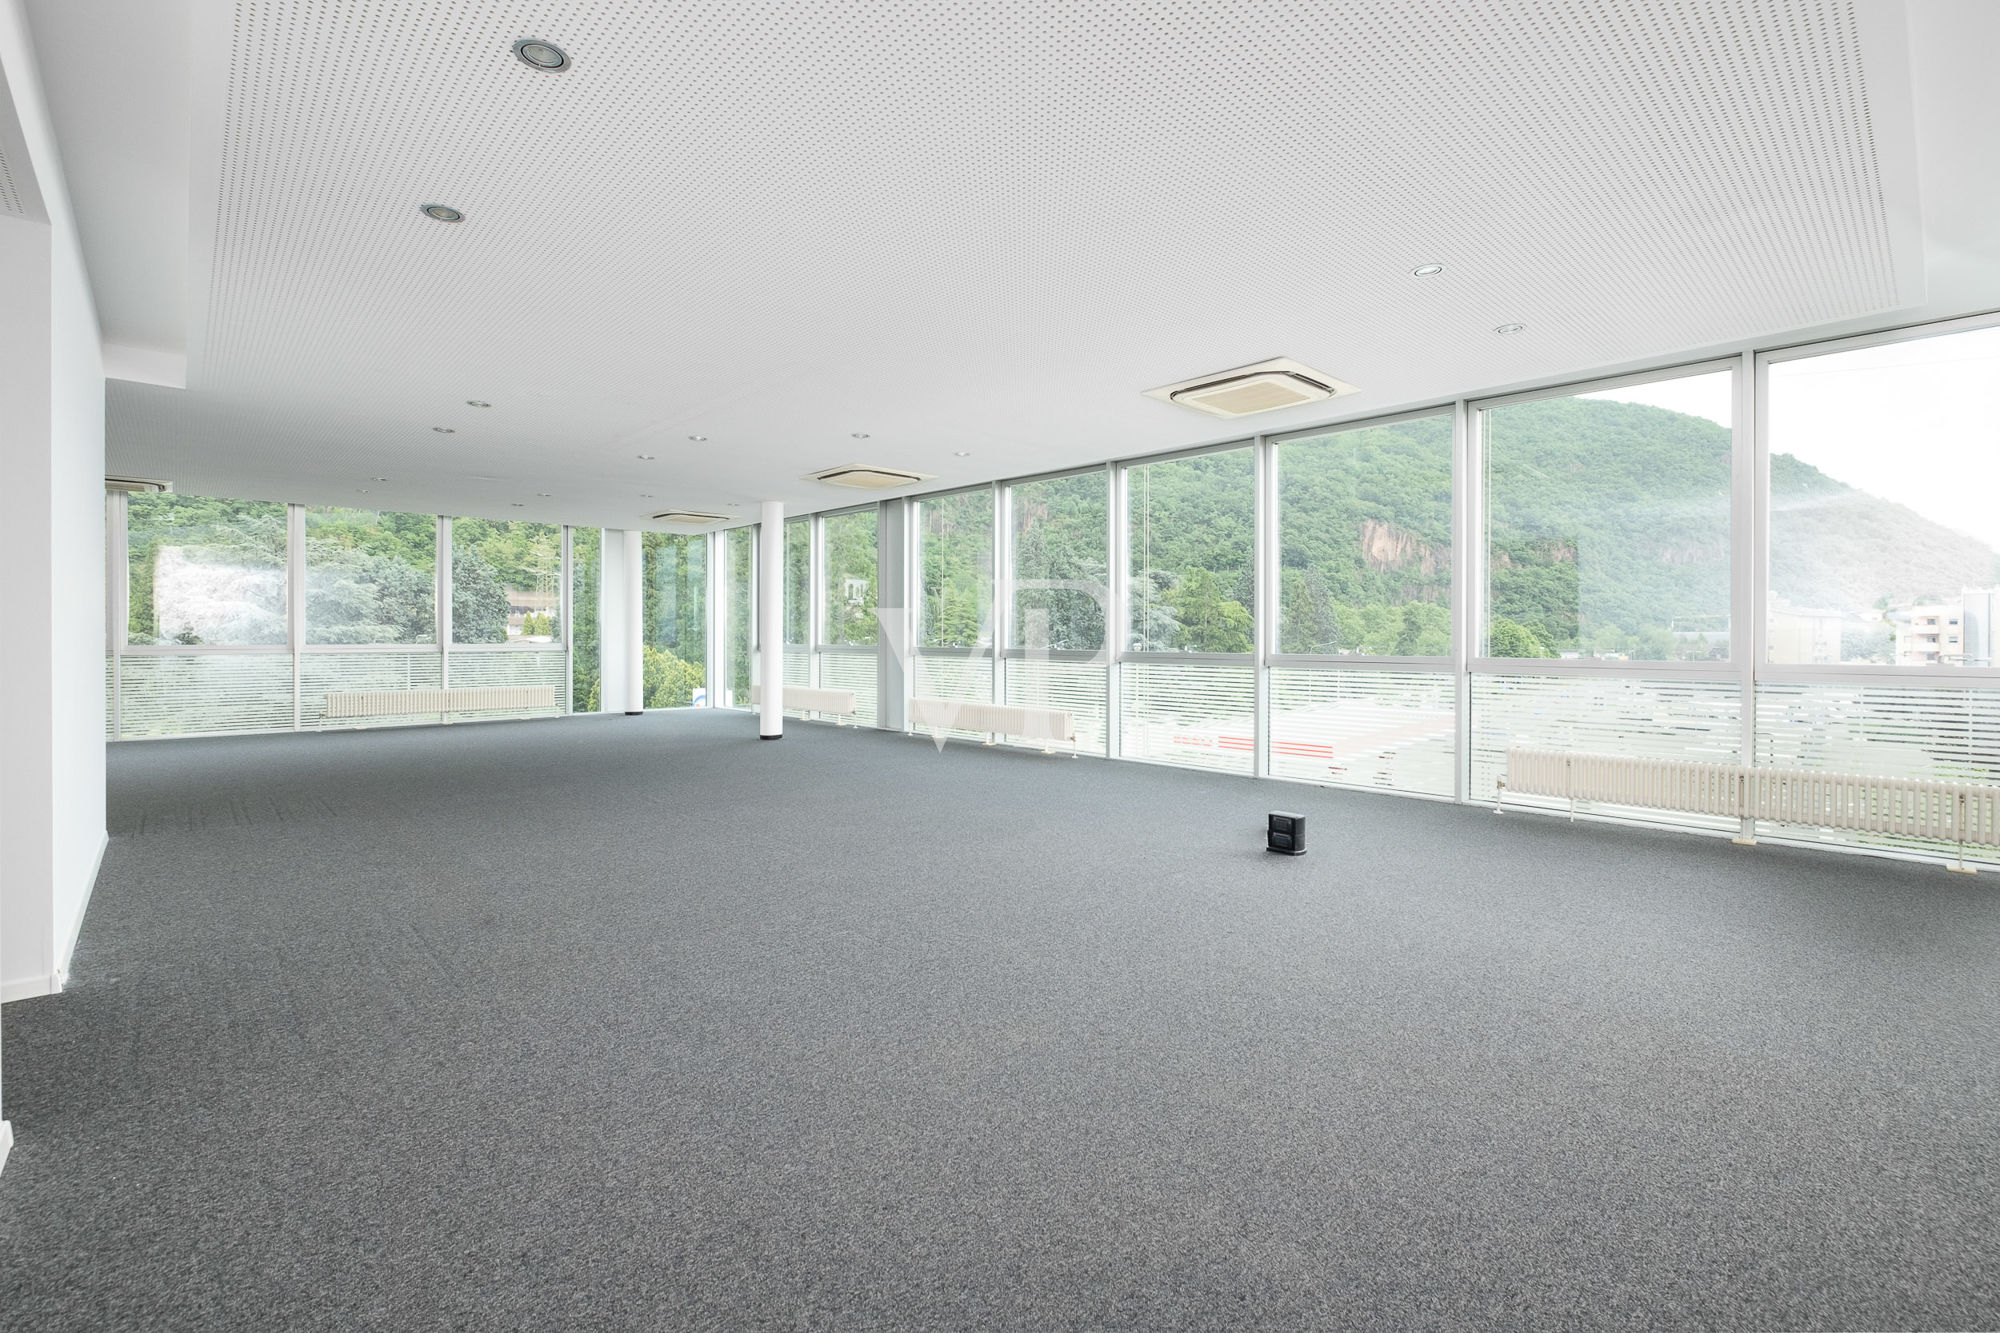 Bright Office with Large Windows and Three Parking Spaces in Garage